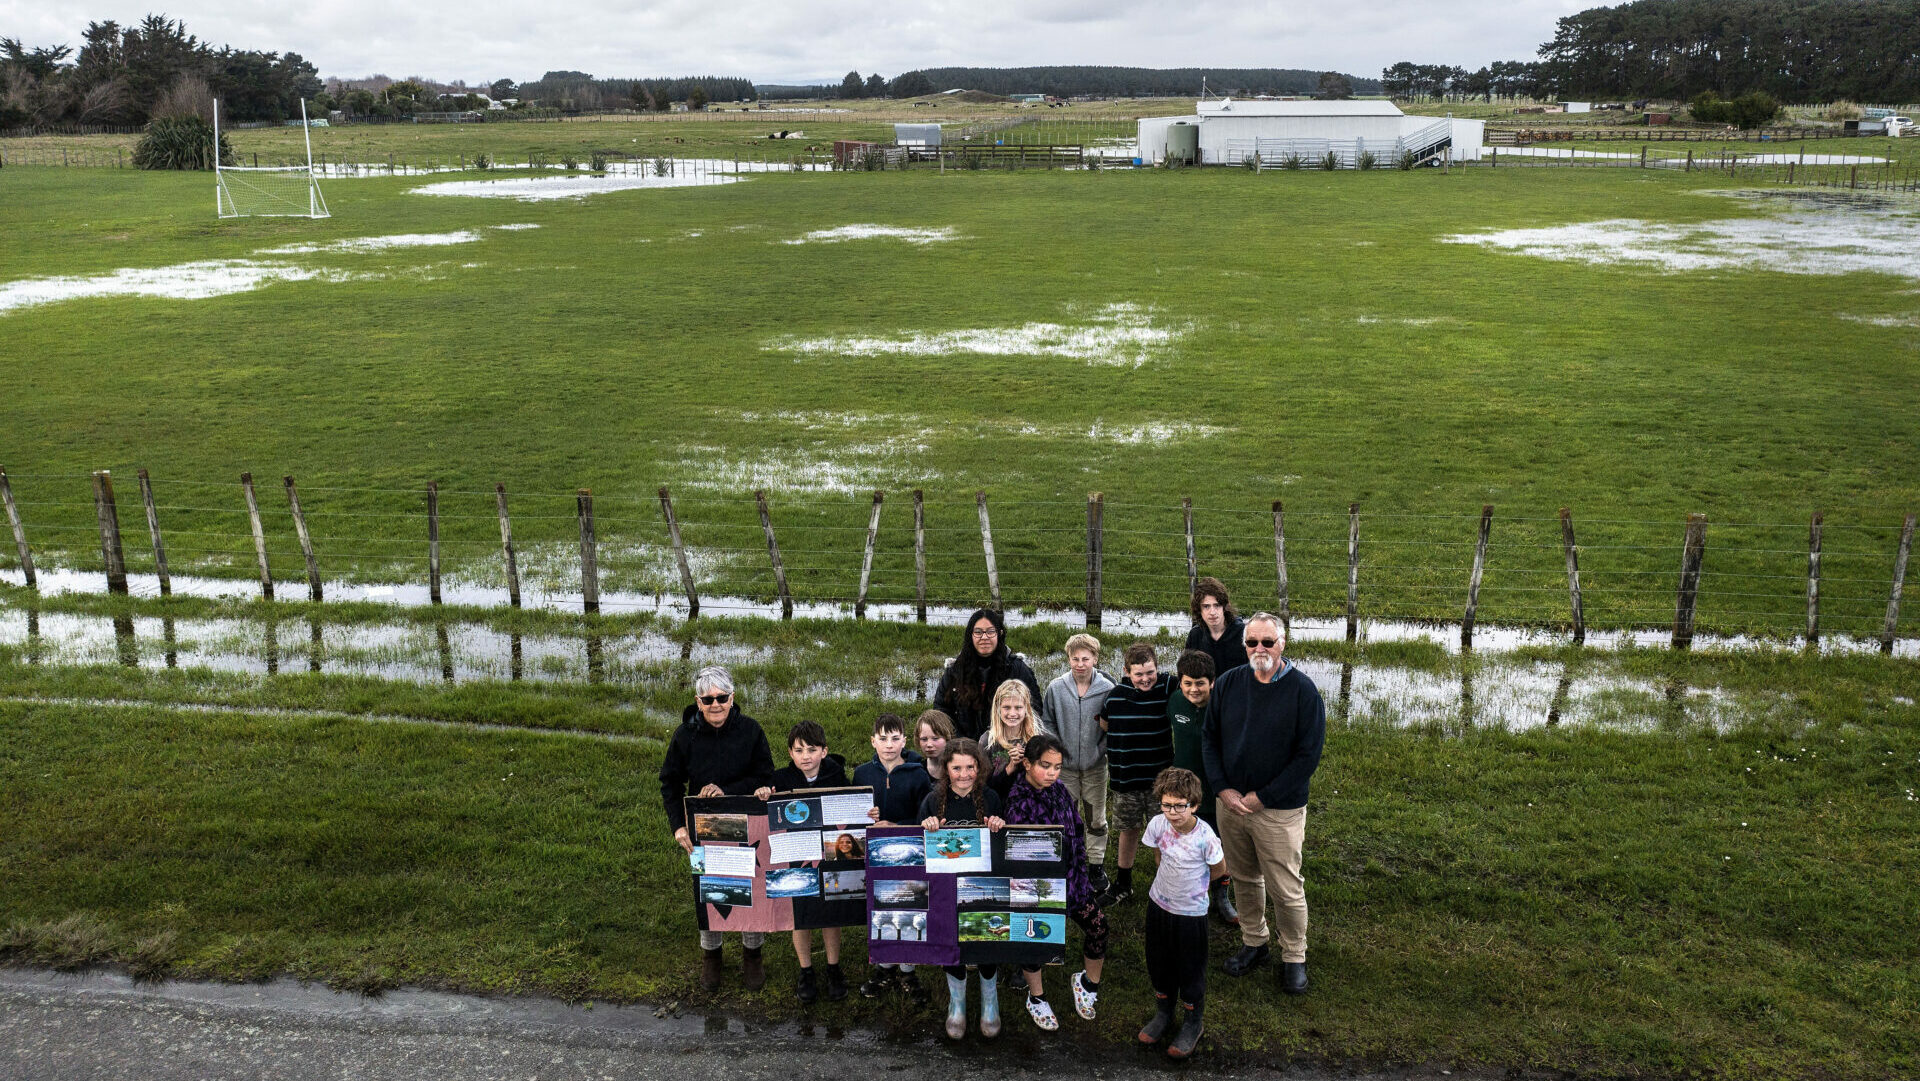 Image credit: Stuff Limited (David Unwin). Children in front of flooding on paddock